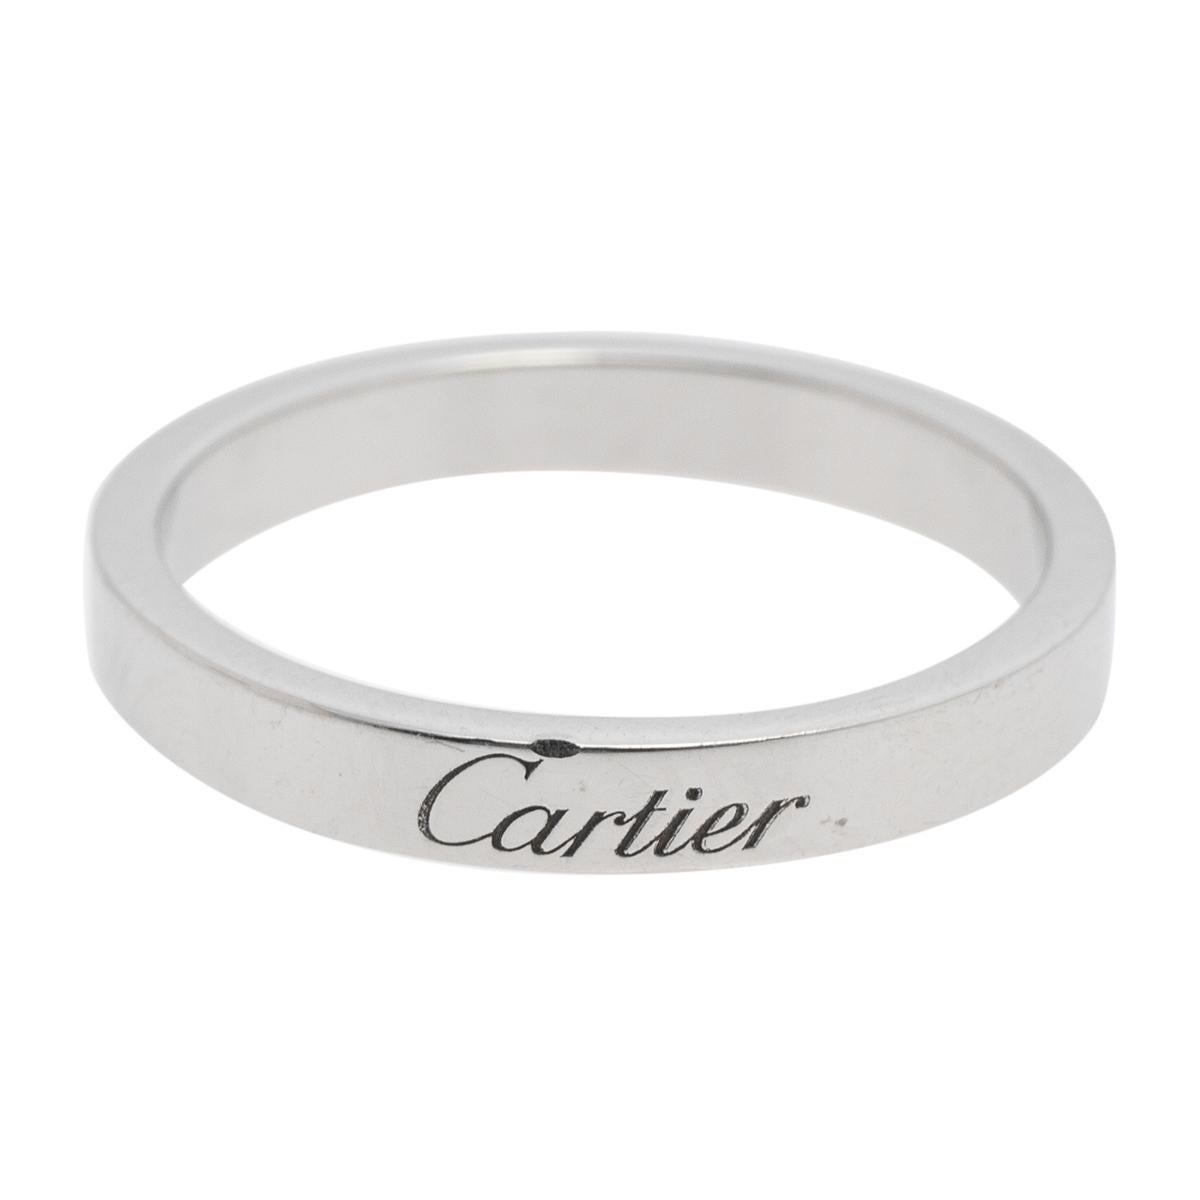 Let this C de Cartier band ring be a favored choice when it comes to choosing a wedding or engagement ring. The ring is made from platinum and highlighted by brand engravings. It will be a prized accessory you will love wearing every day.

Includes: